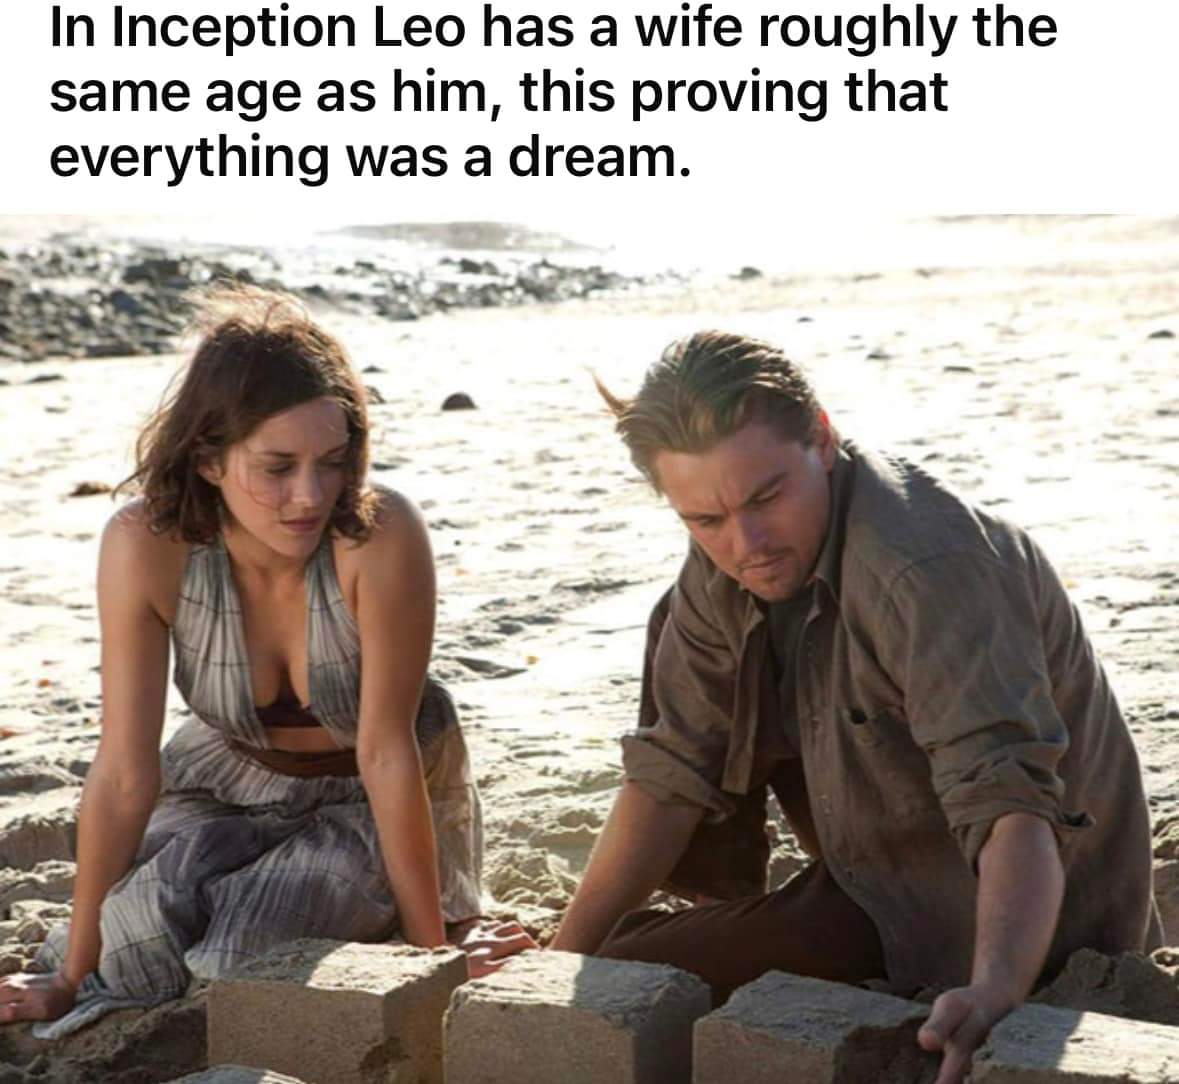 funny memes - inception review - In Inception Leo has a wife roughly the same age as him, this proving that everything was a dream.